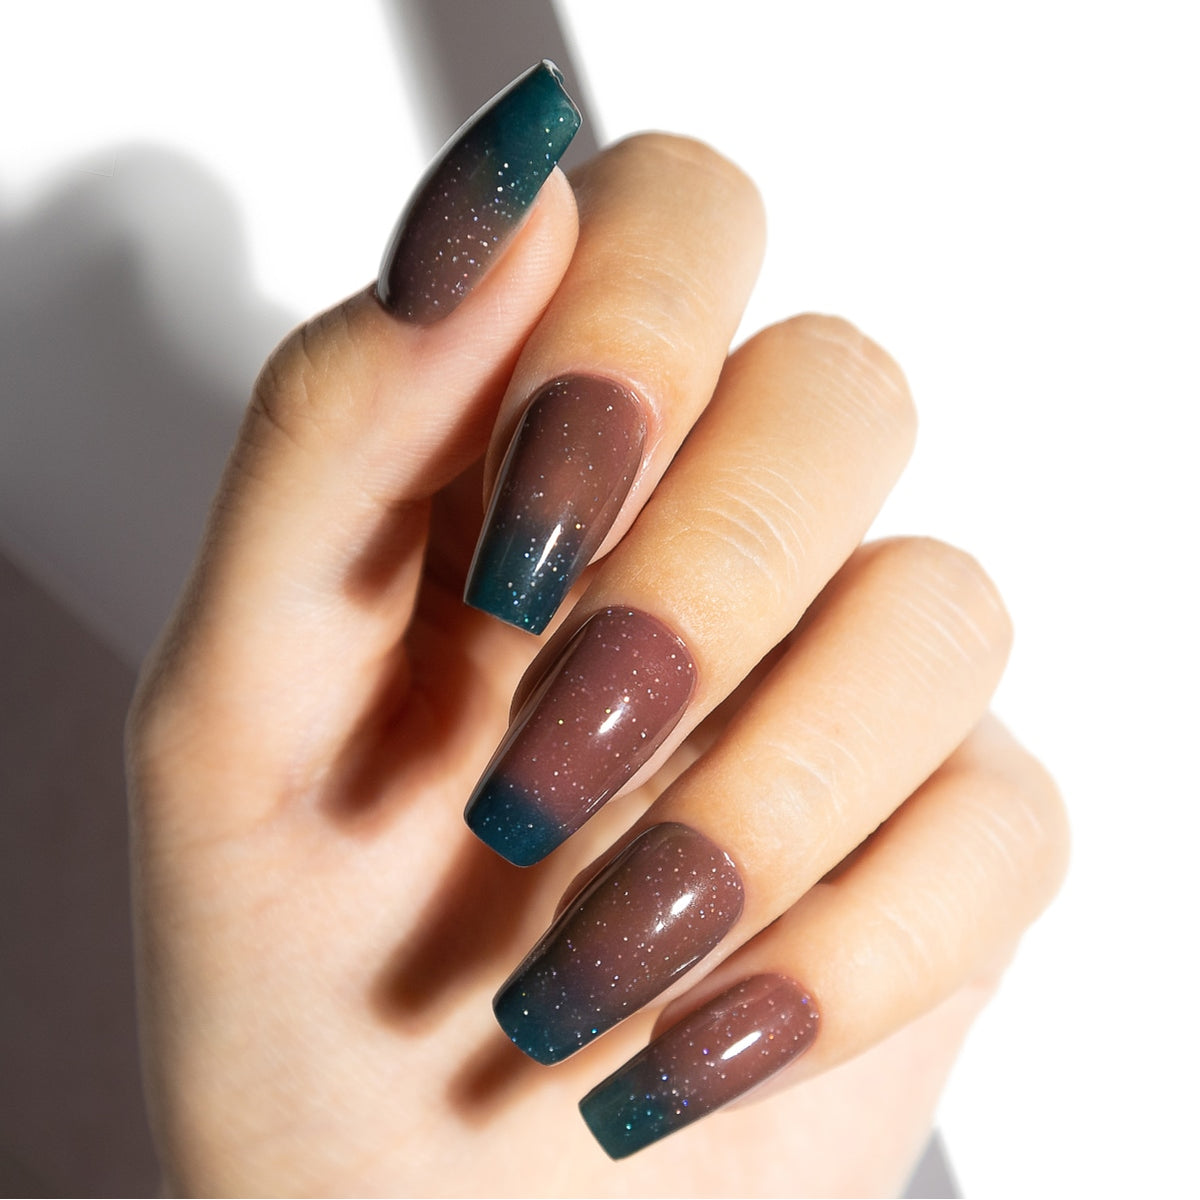 Dip Powder Color-Changing Ombre Nail Tutorial 